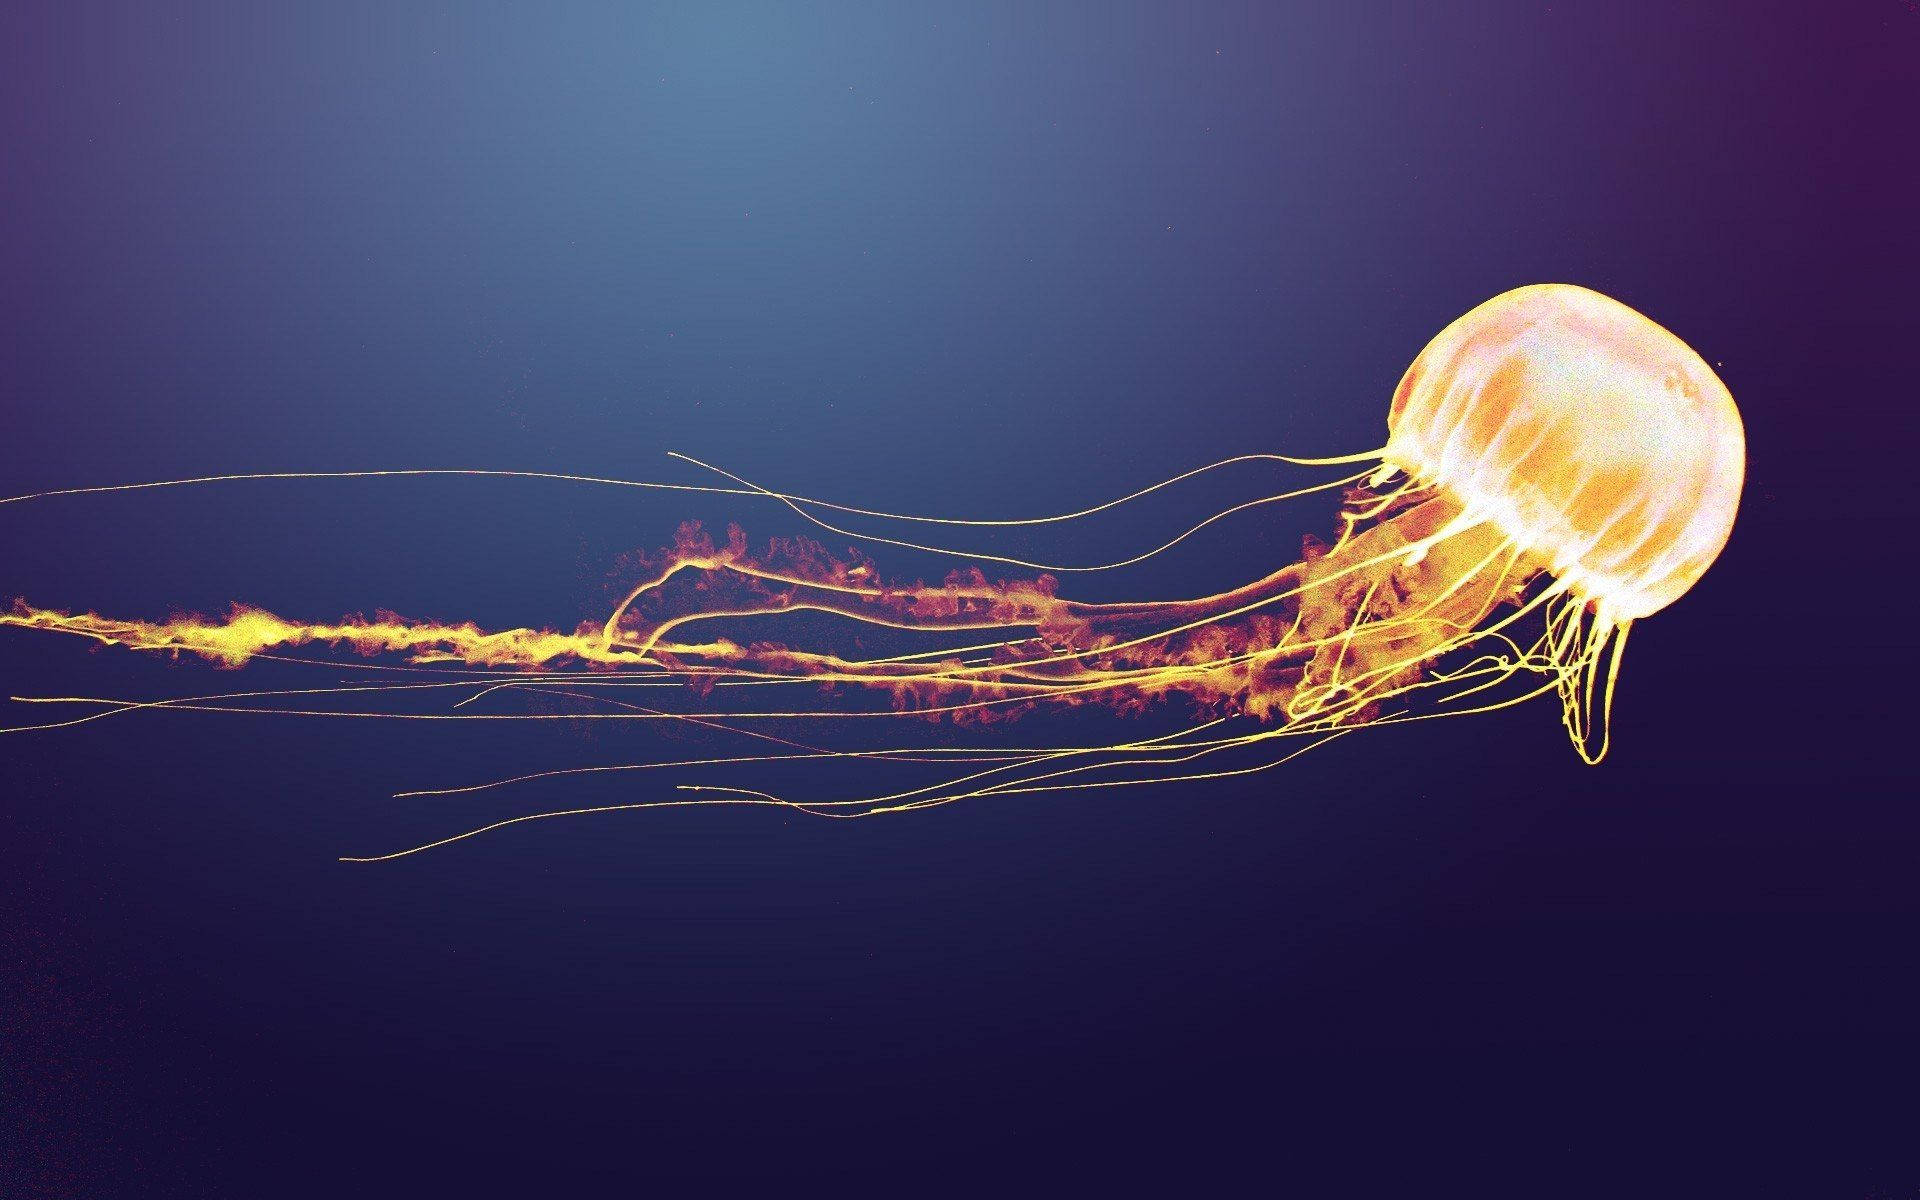 Free Jellyfish Wallpaper Downloads, [100+] Jellyfish Wallpapers for FREE |  